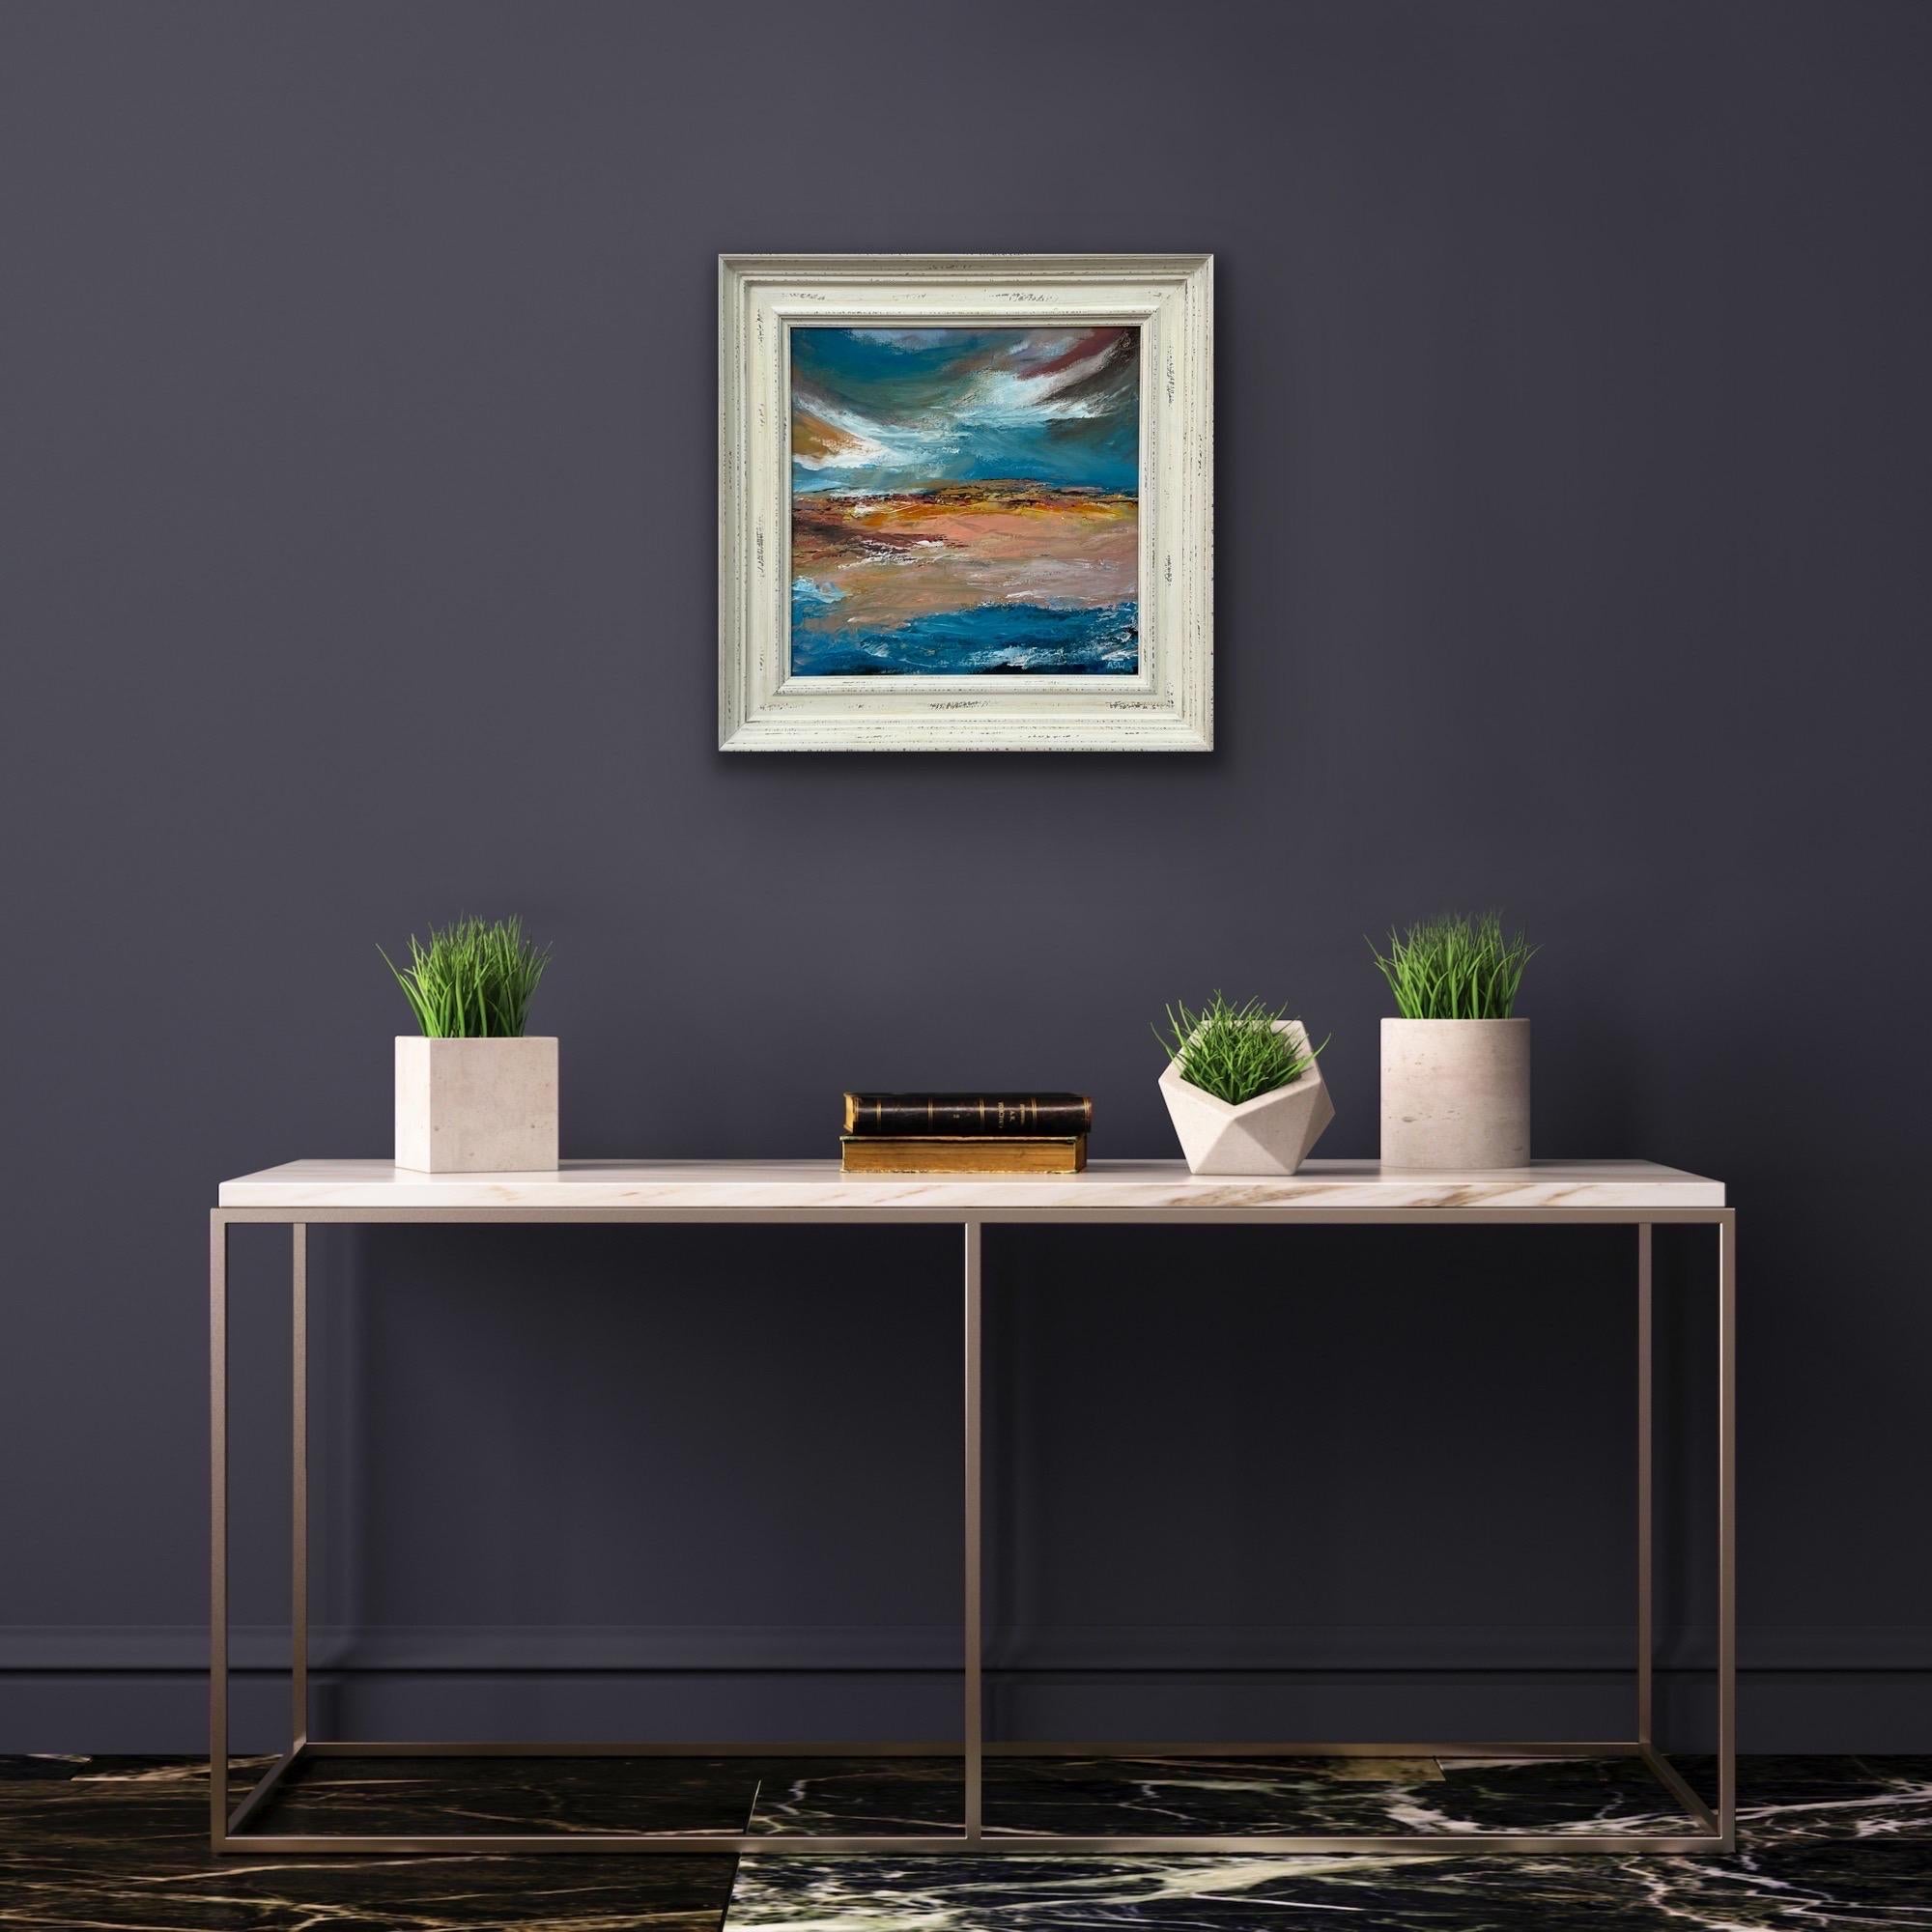 Colourful Expressive Abstract Seascape Landscape Painting with Dramatic Sky by Contemporary British Artist, Angela Wakefield. 

Art measures 16 x 16 inches
Frame measures 21 x 21 inches

Angela Wakefield has twice been on the front cover of ‘Art of